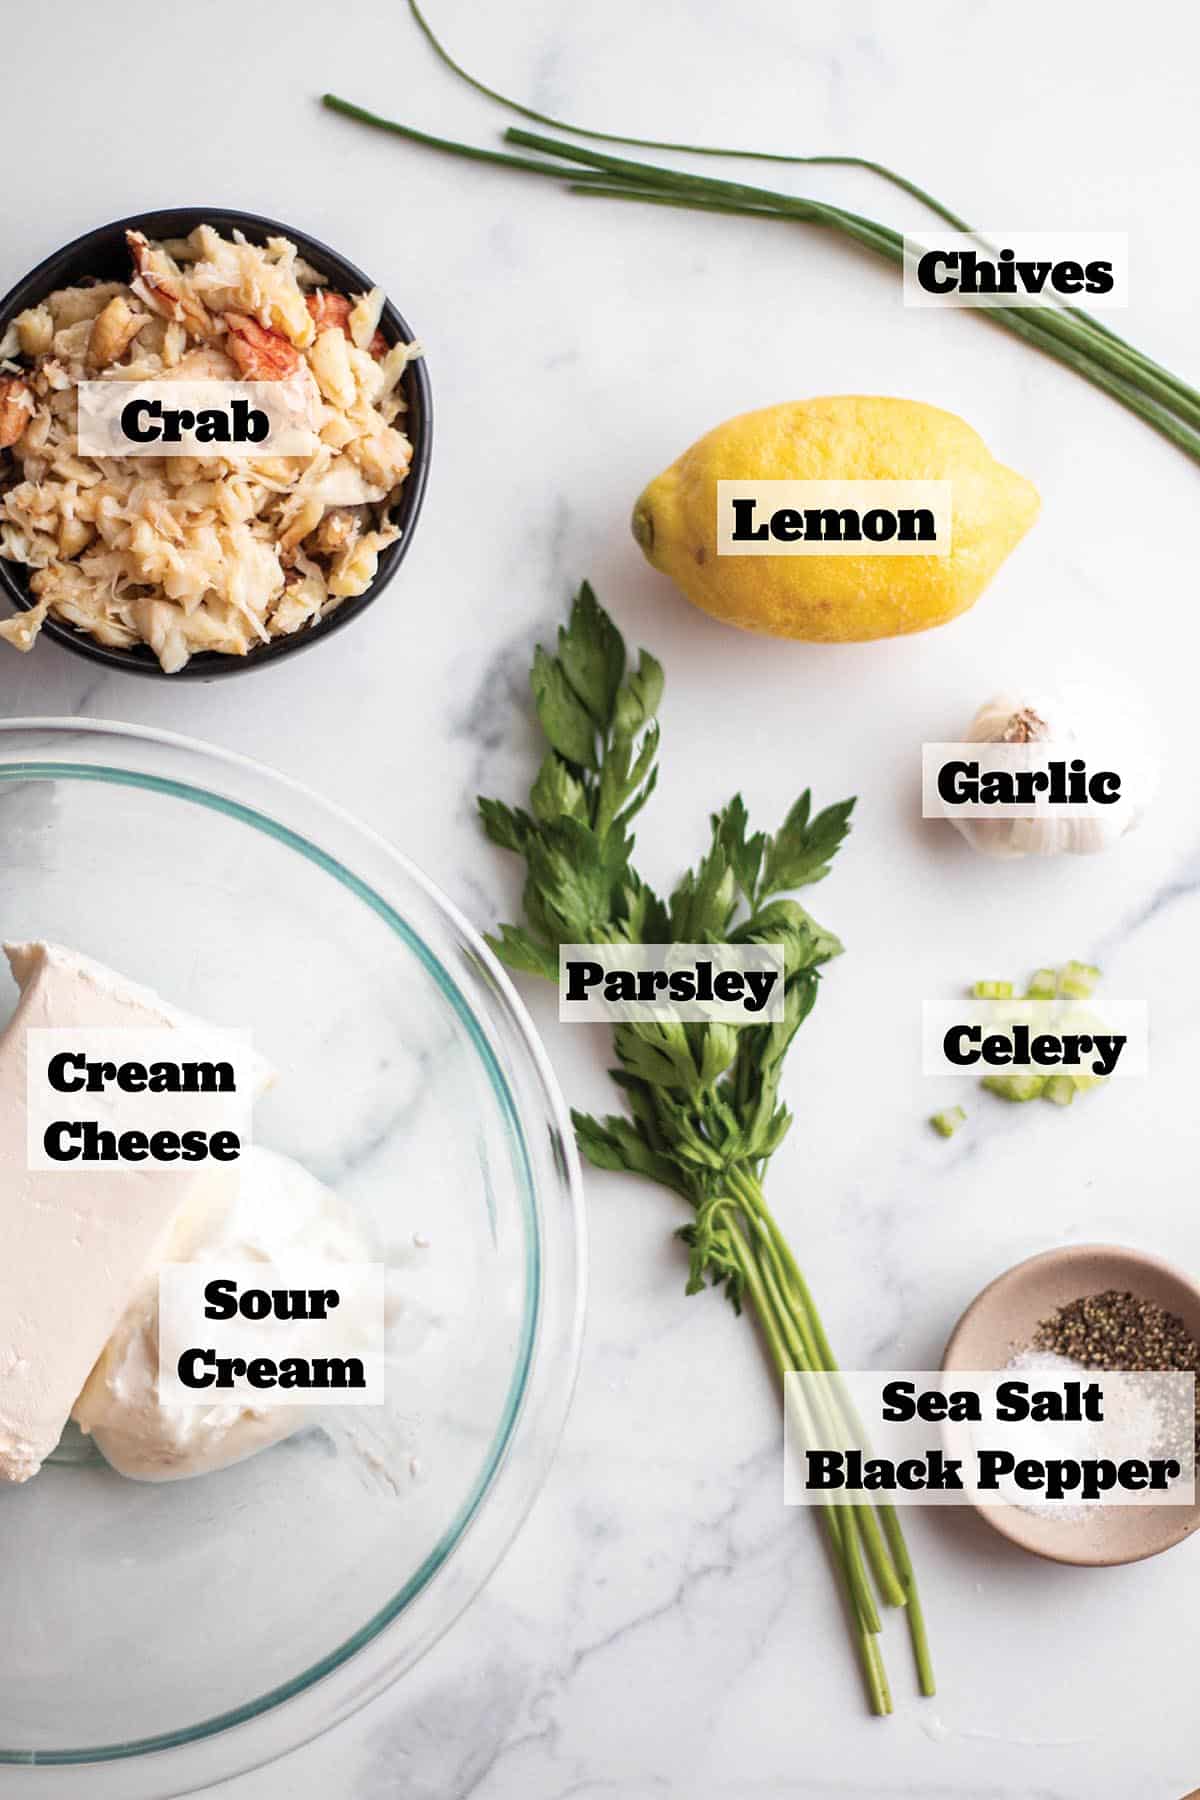 Ingredients to make a crab dip. A bowl of fresh crab, fresh chives and parsley, cream cheese, sour cream, salt & pepper, garlic, celery and lemon.